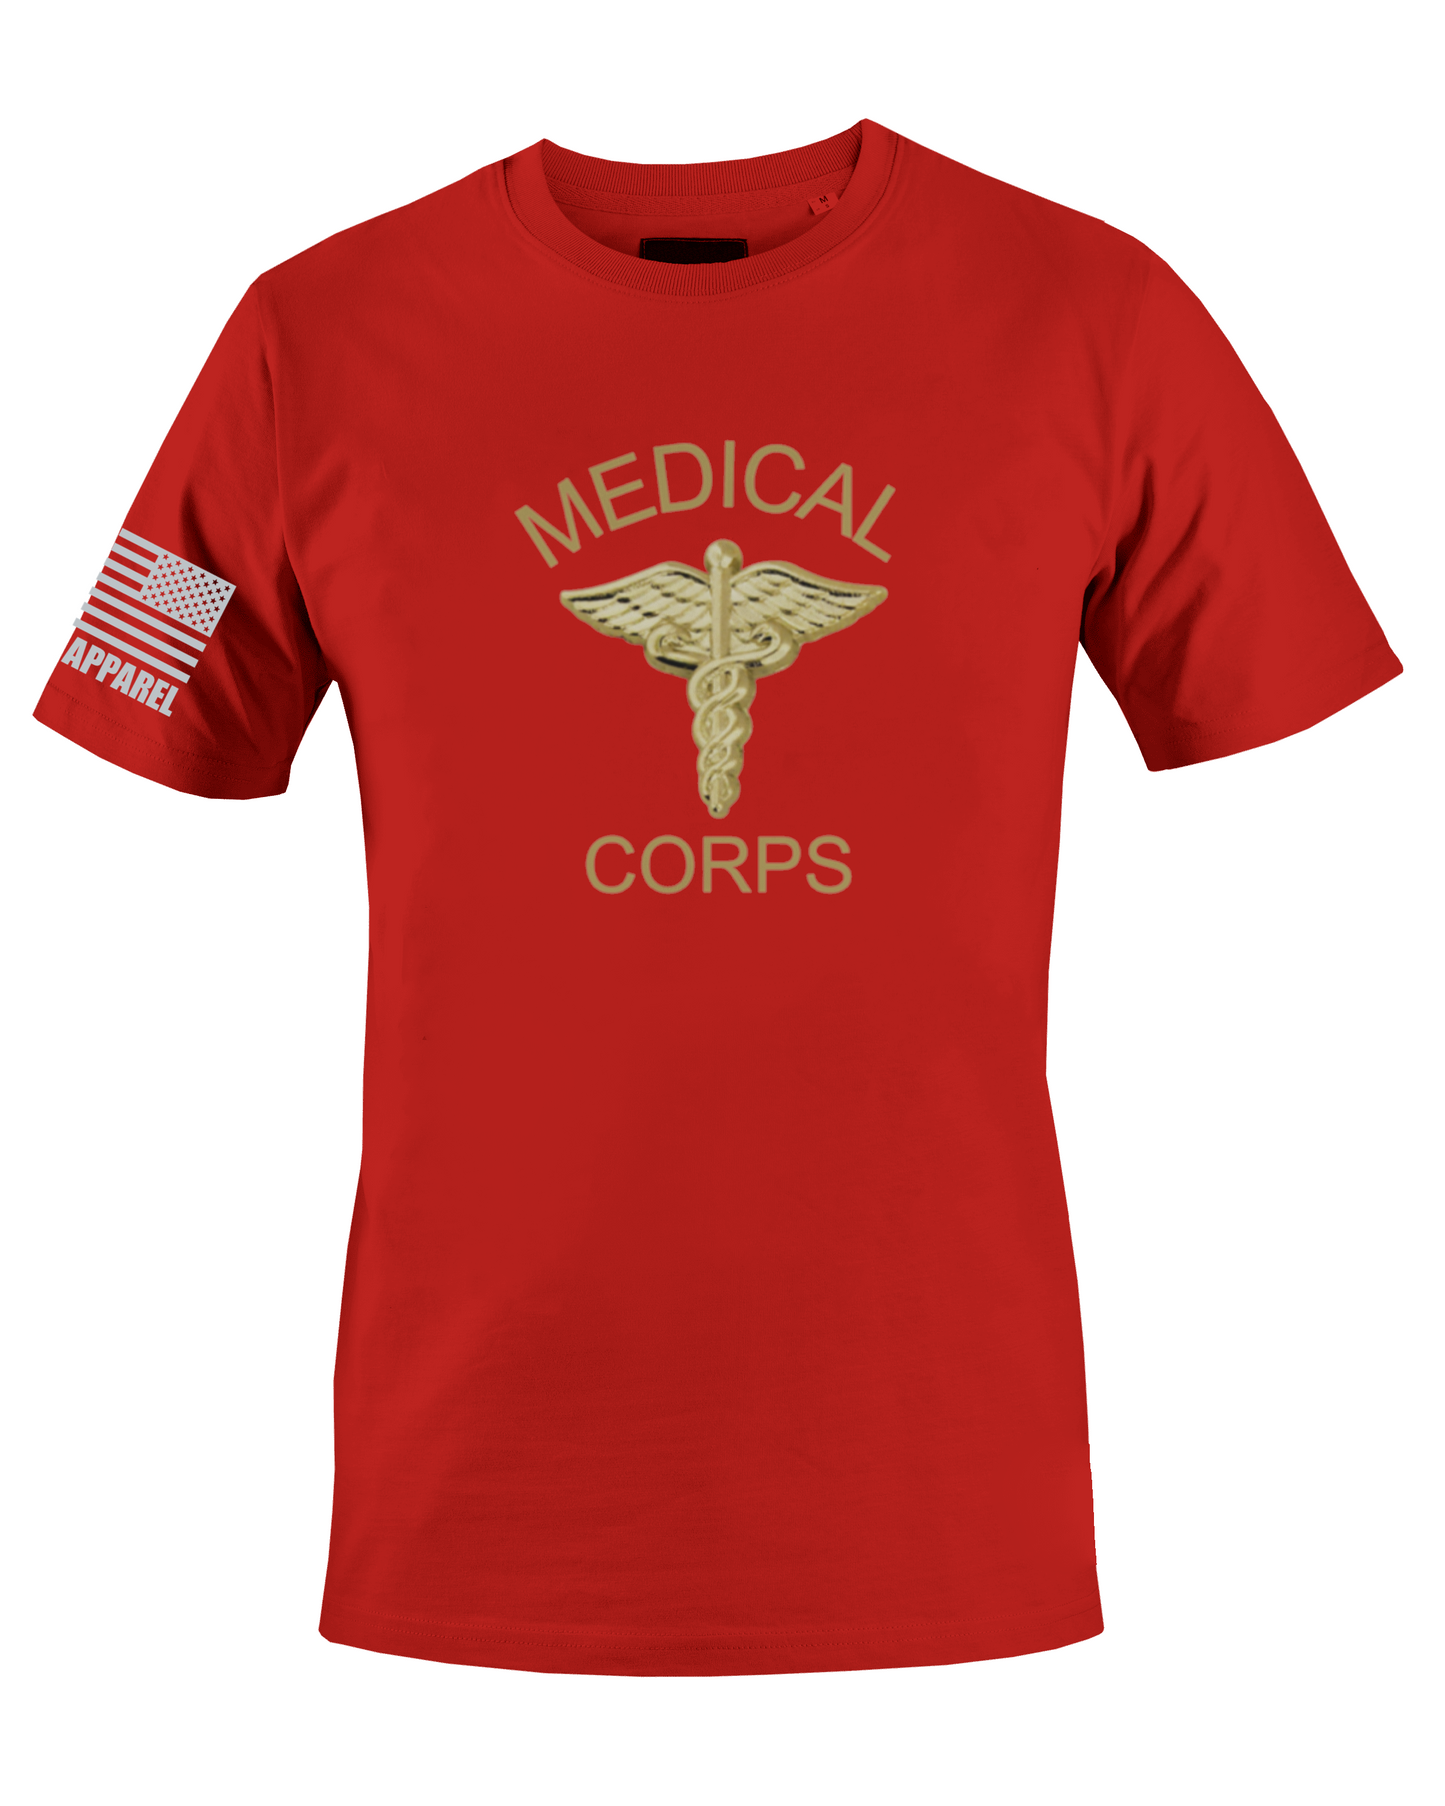 MEDICAL CORPS GOLD